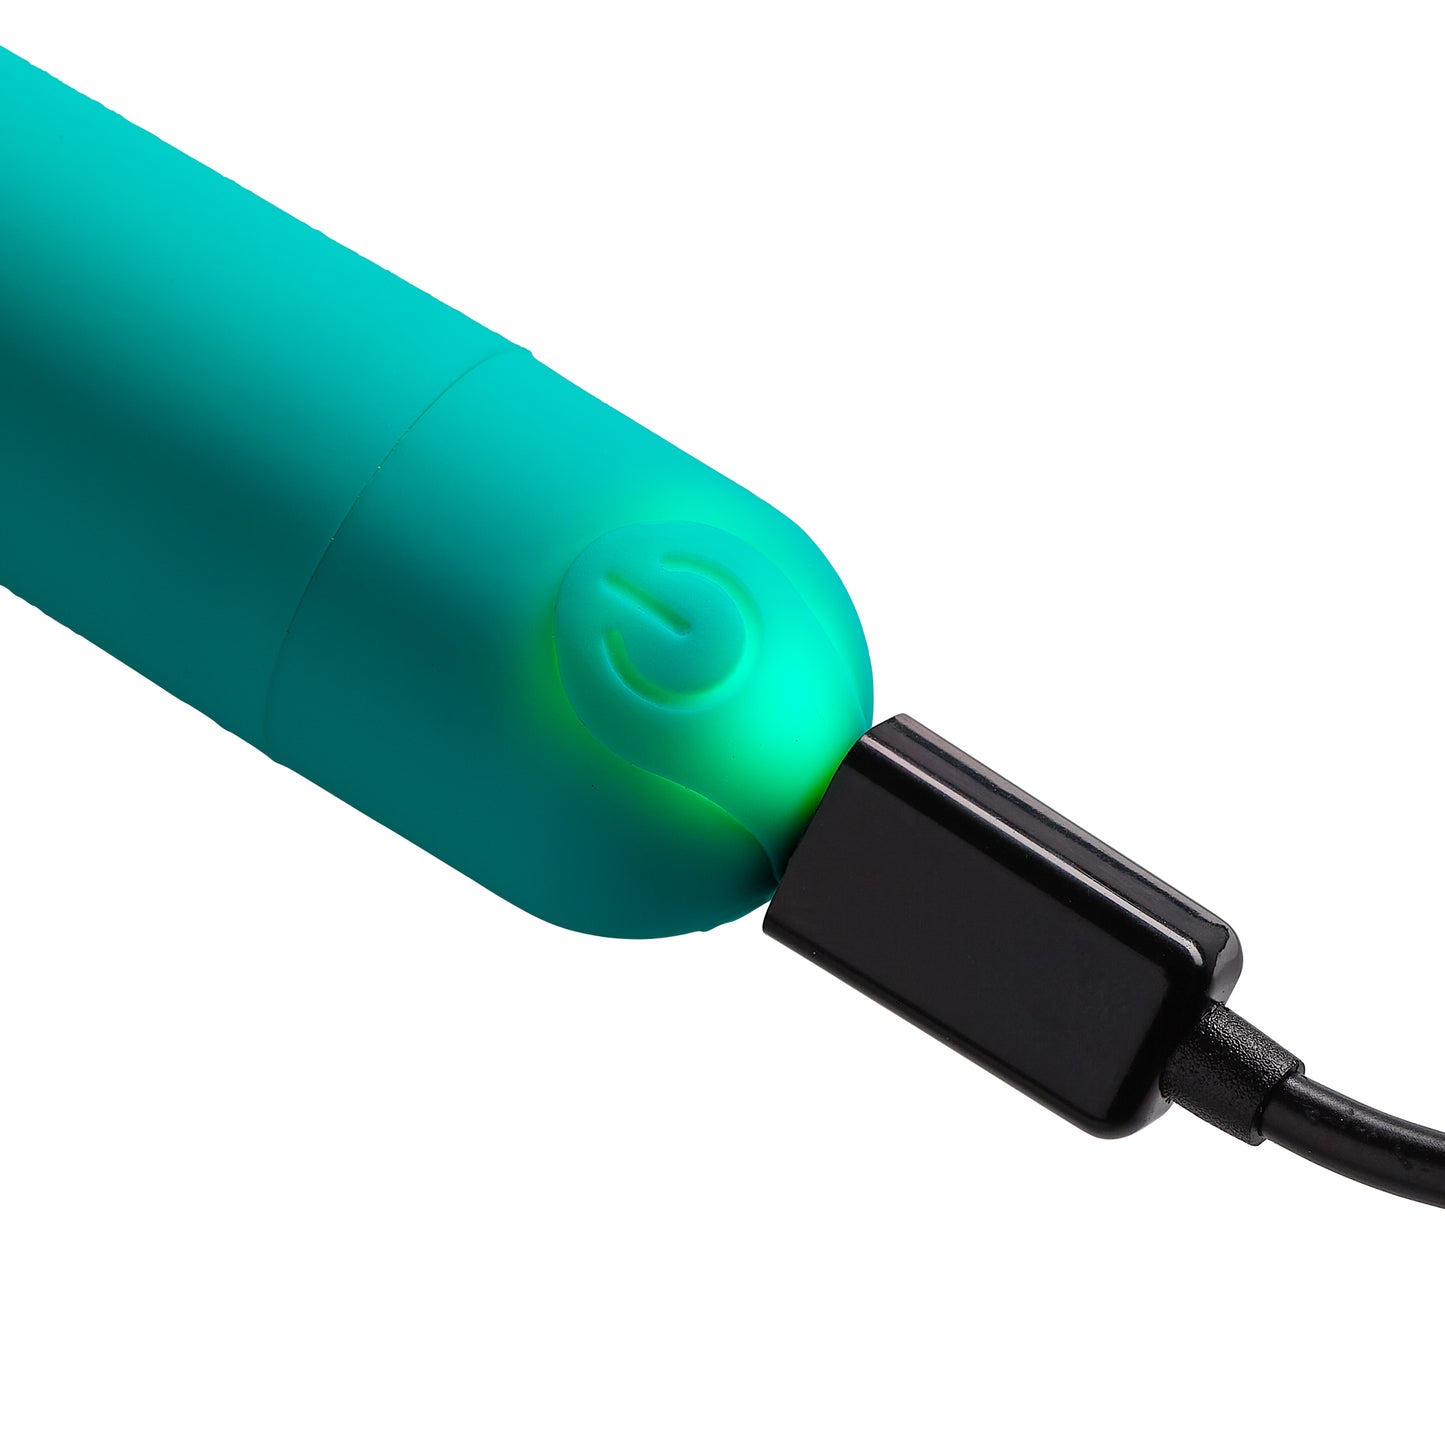 Cloud 9 Power Touch Iii - Mini Rechargeable Bullet